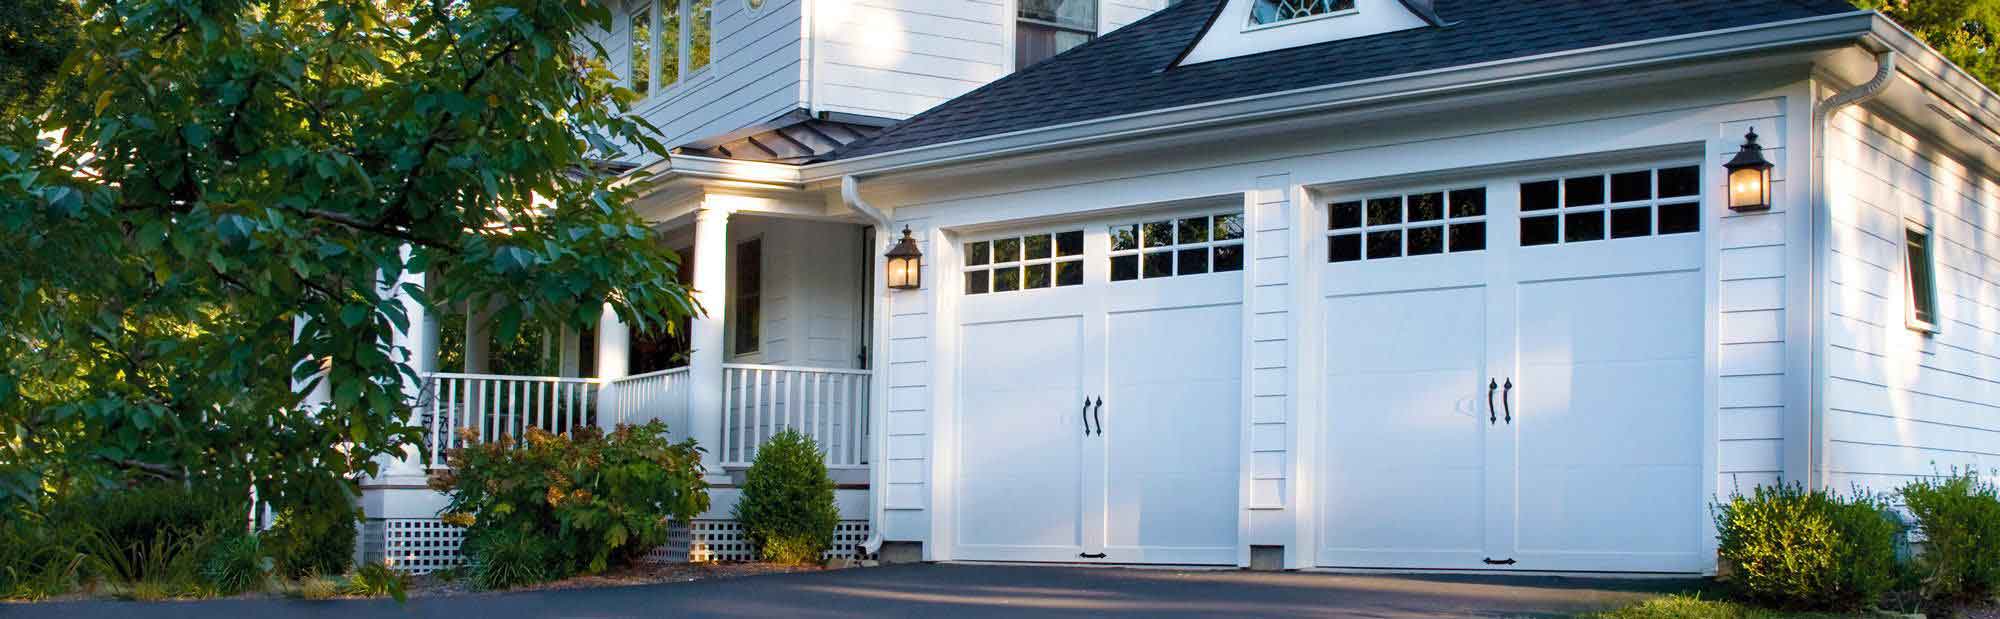 Does your garage door need servicing, repairs or a replacement?